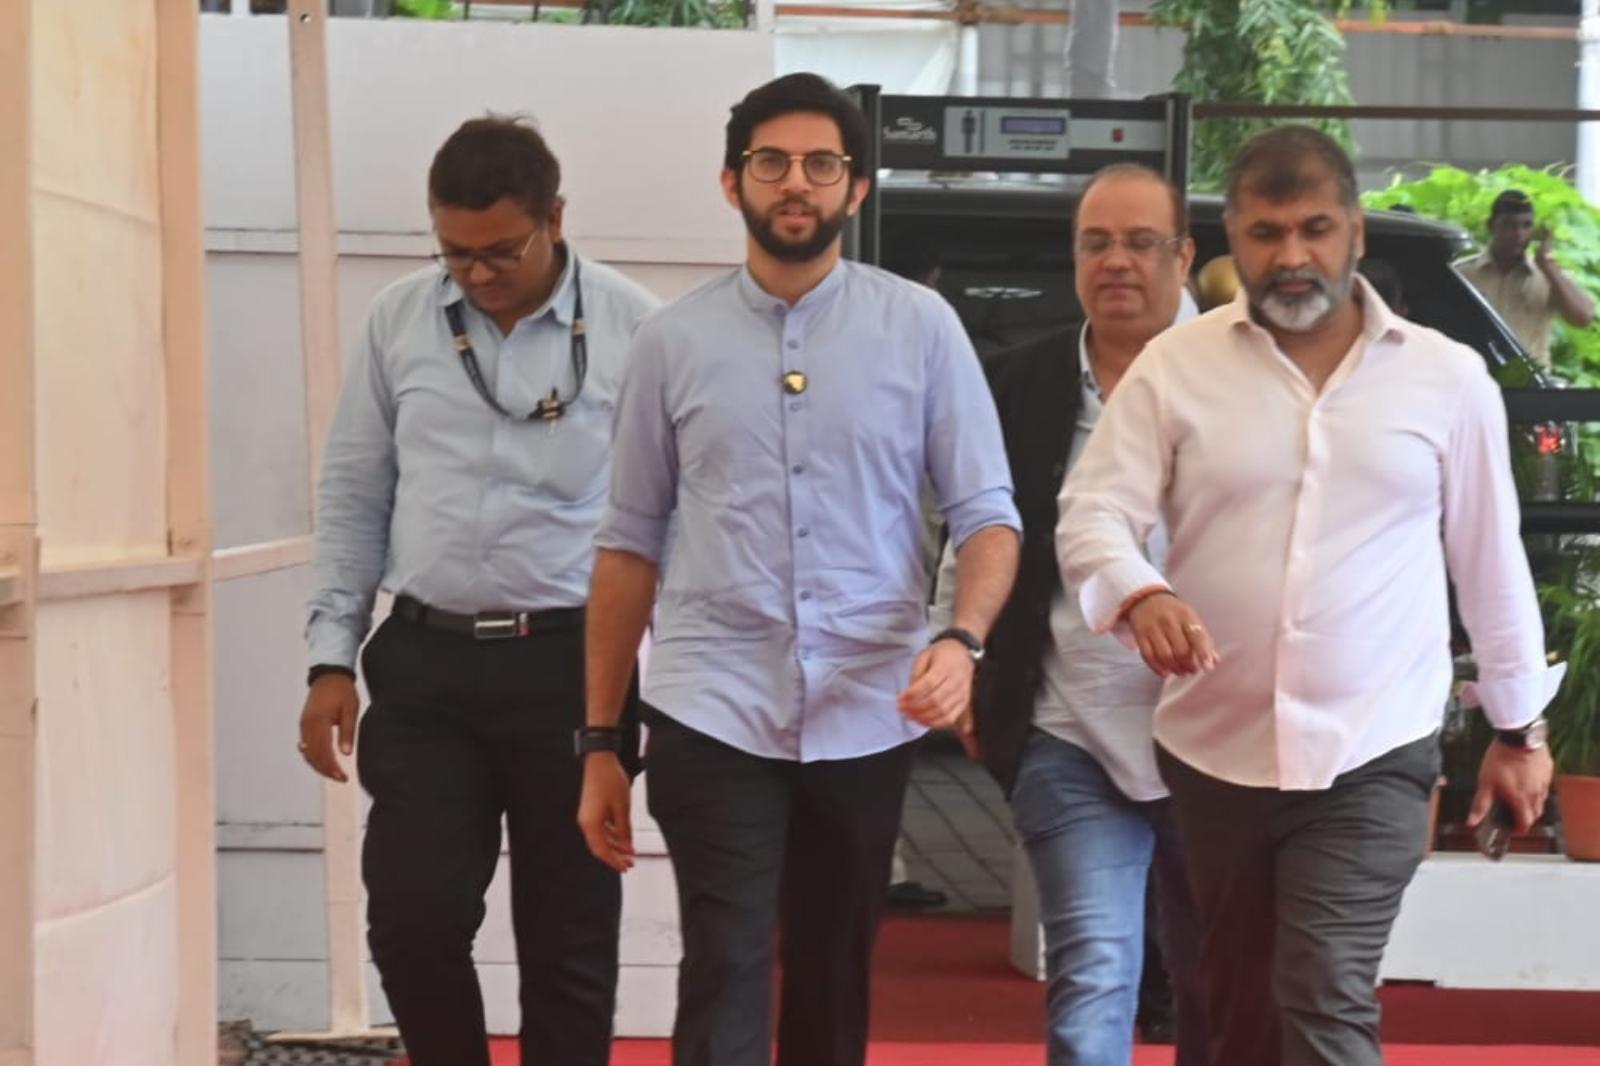 Shiv Sena leader Aaditya Thackeray on Sunday targeted the Eknath Shinde-led government on the stringent security arrangements in place for rebel Shiv Sena MLAs as they entered the Vidhan Bhavan premises from a nearby luxury hotel. Pic/Sameer Abedi